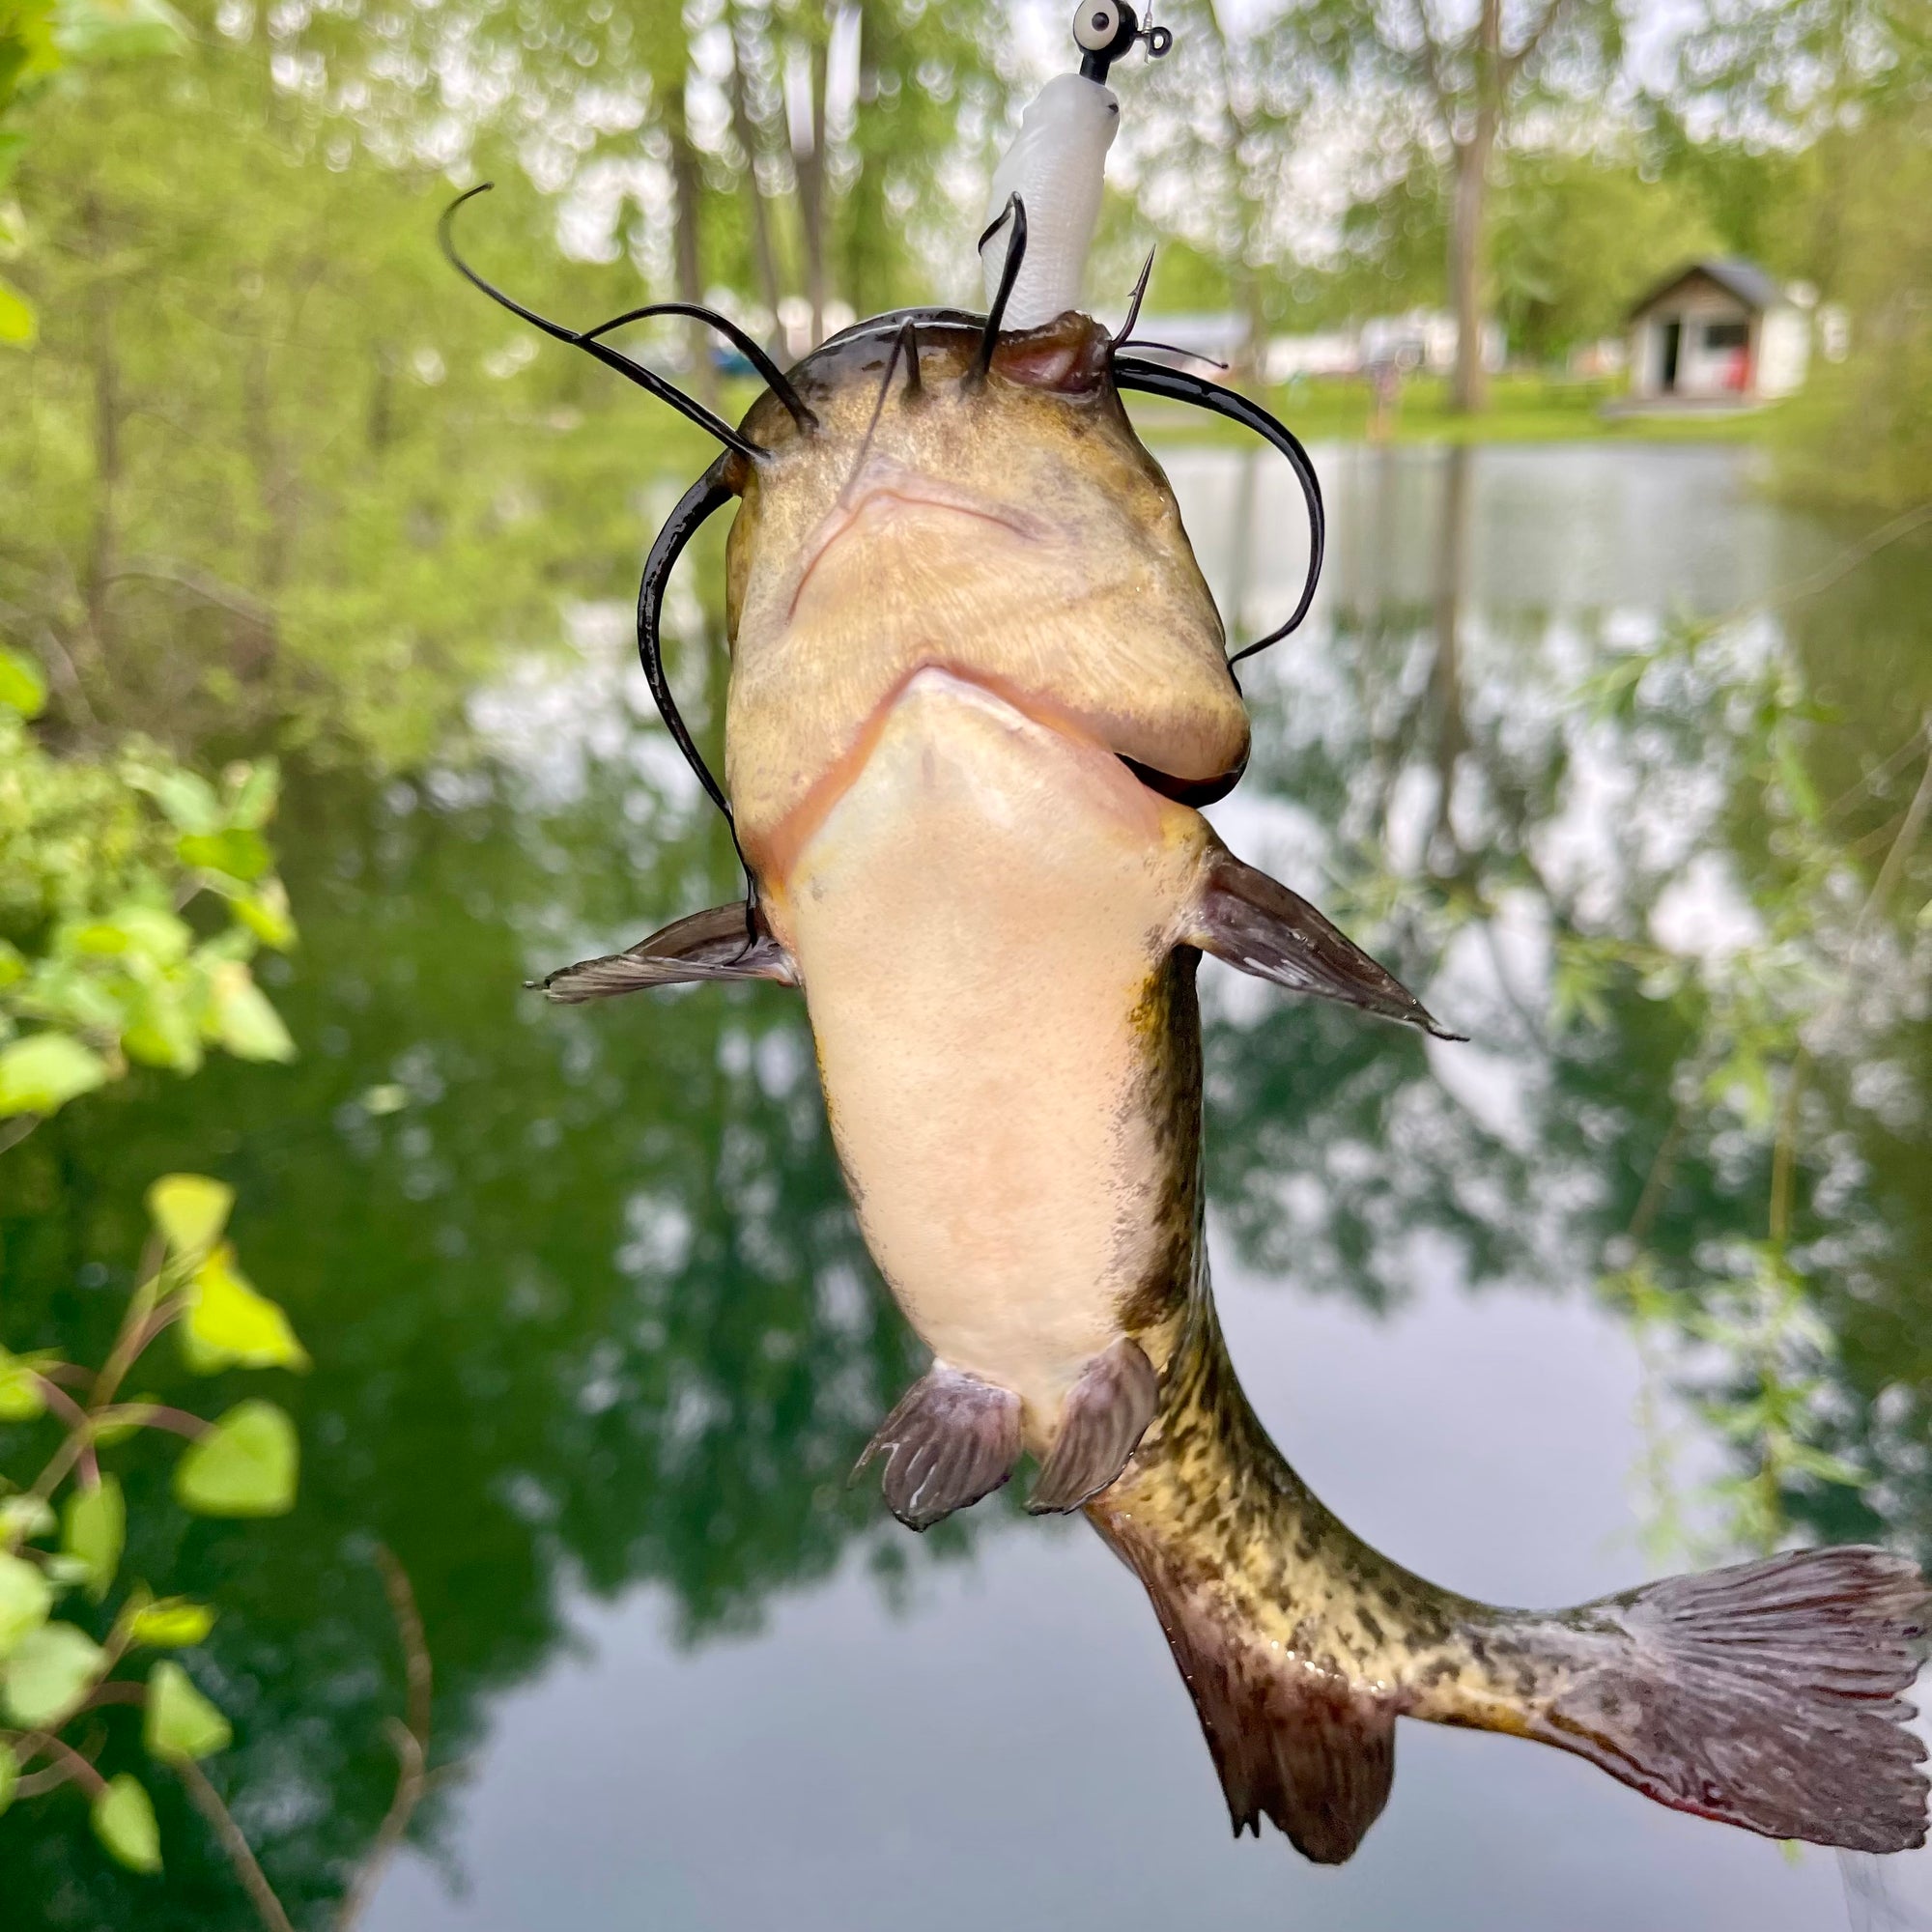 catfish caught from fishing pond. pond and cabin in the background